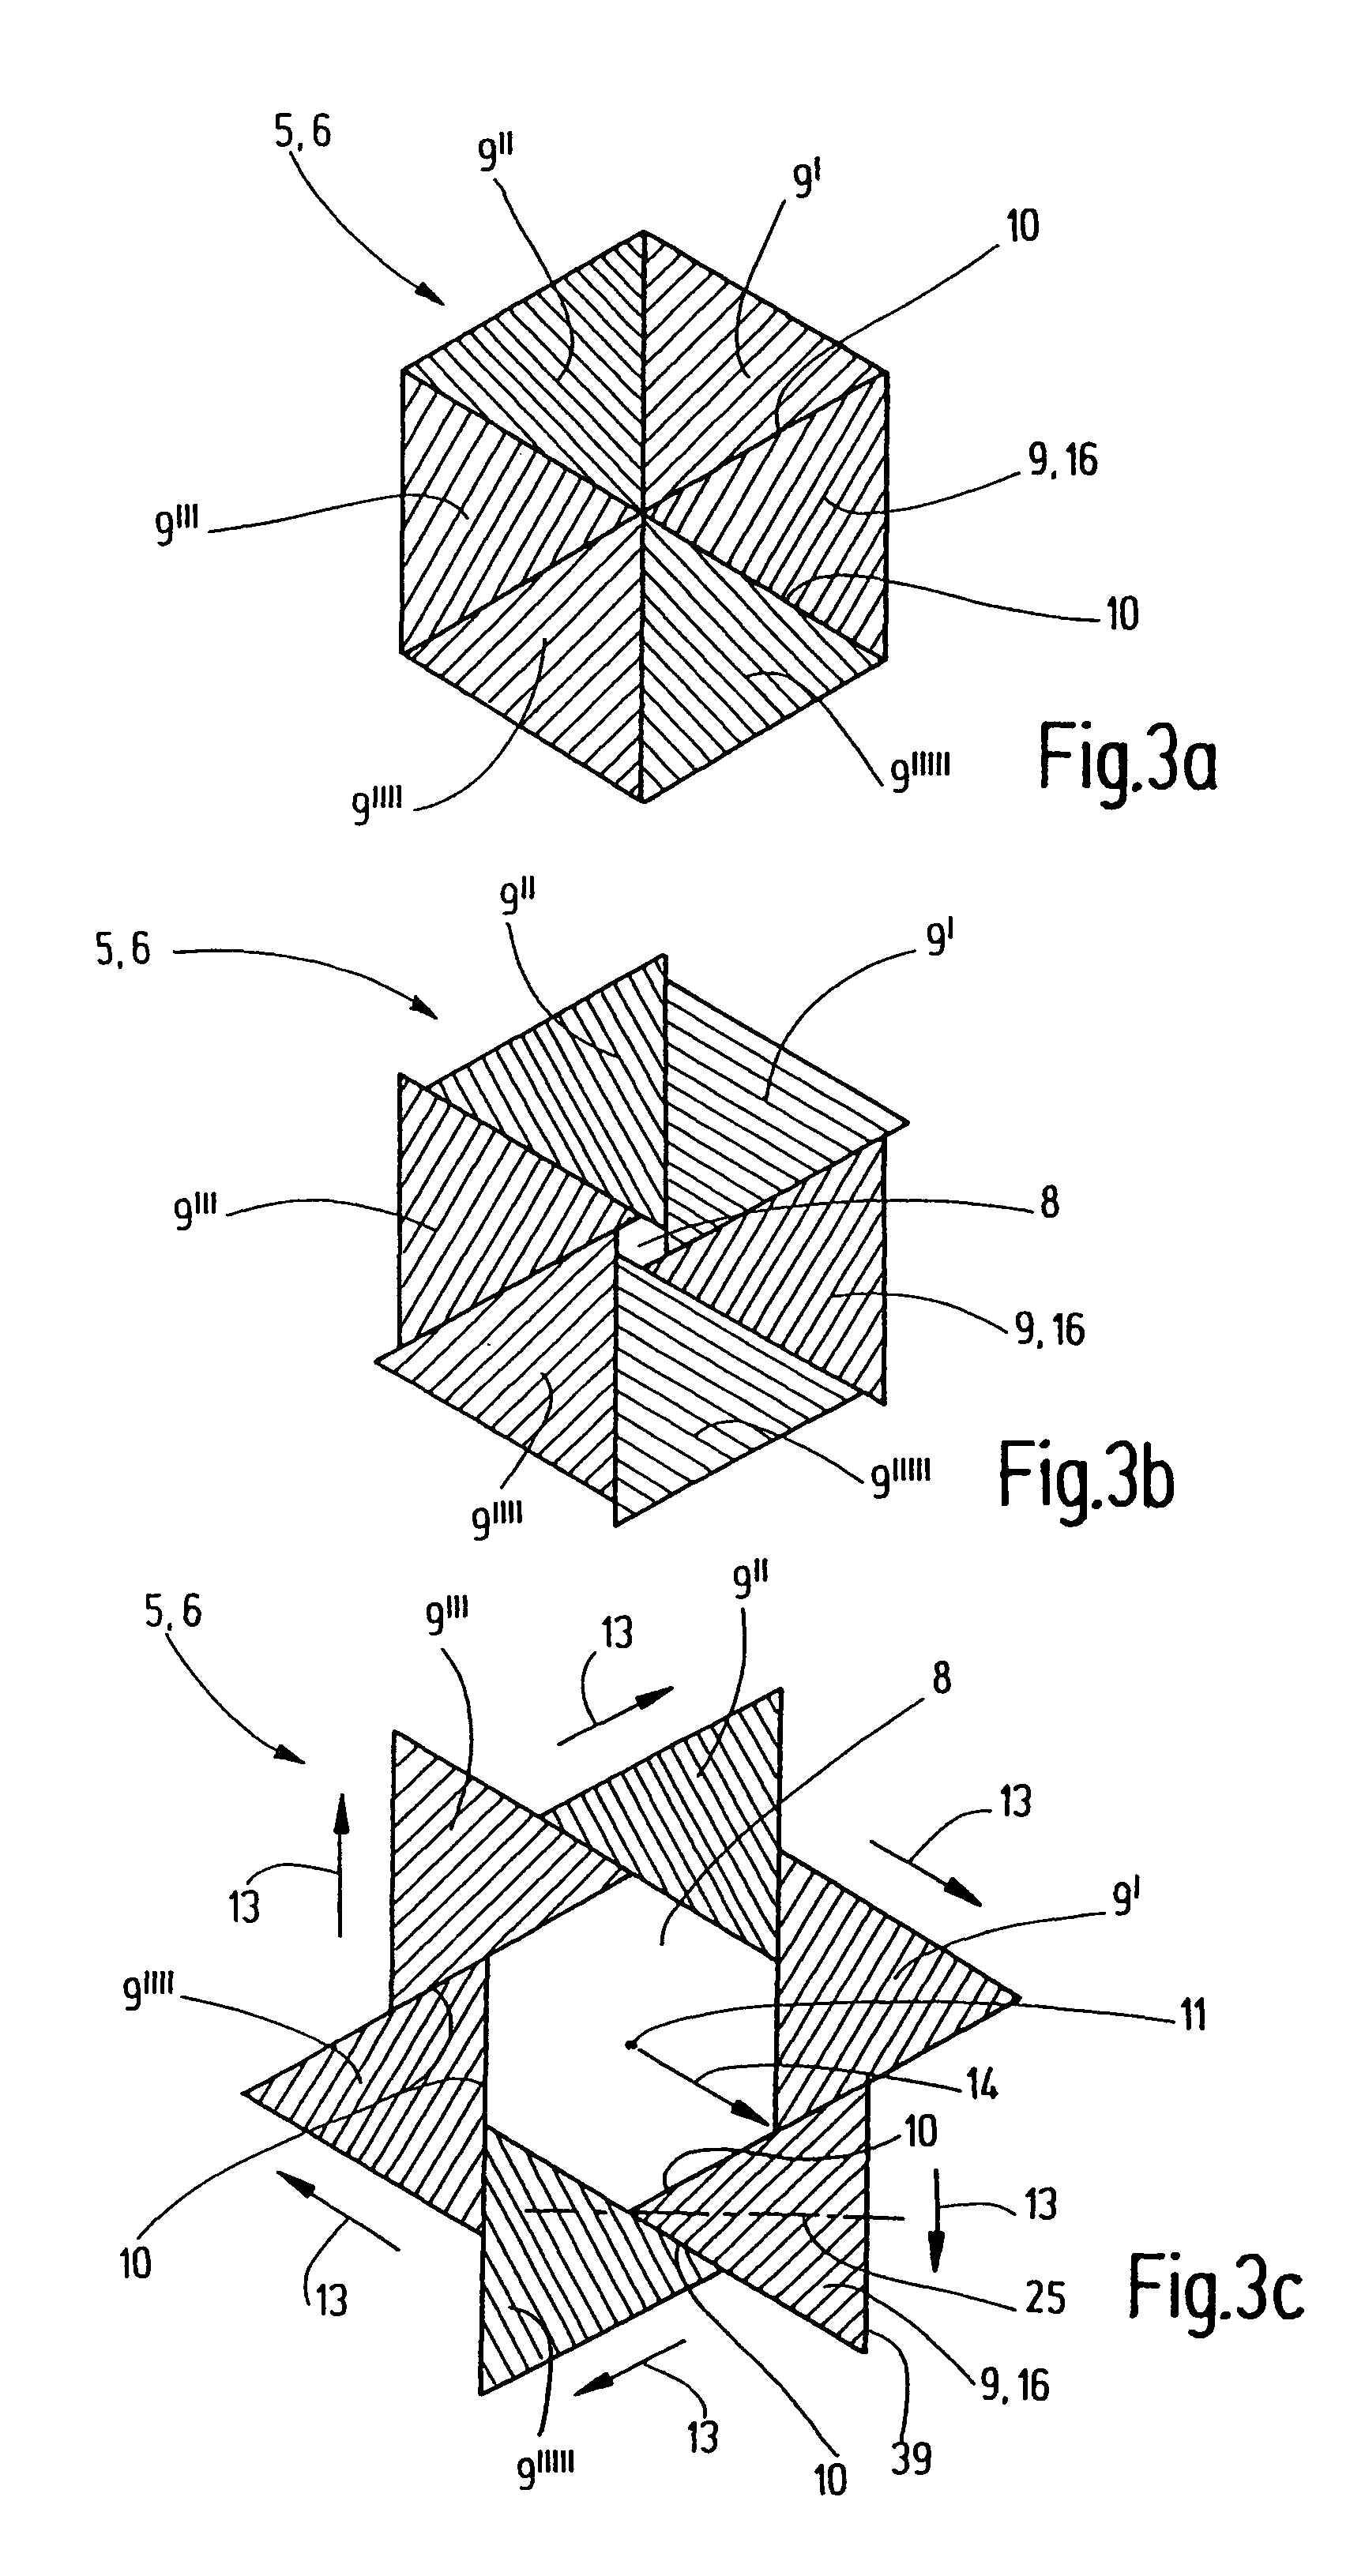 Irradiation device and collimator